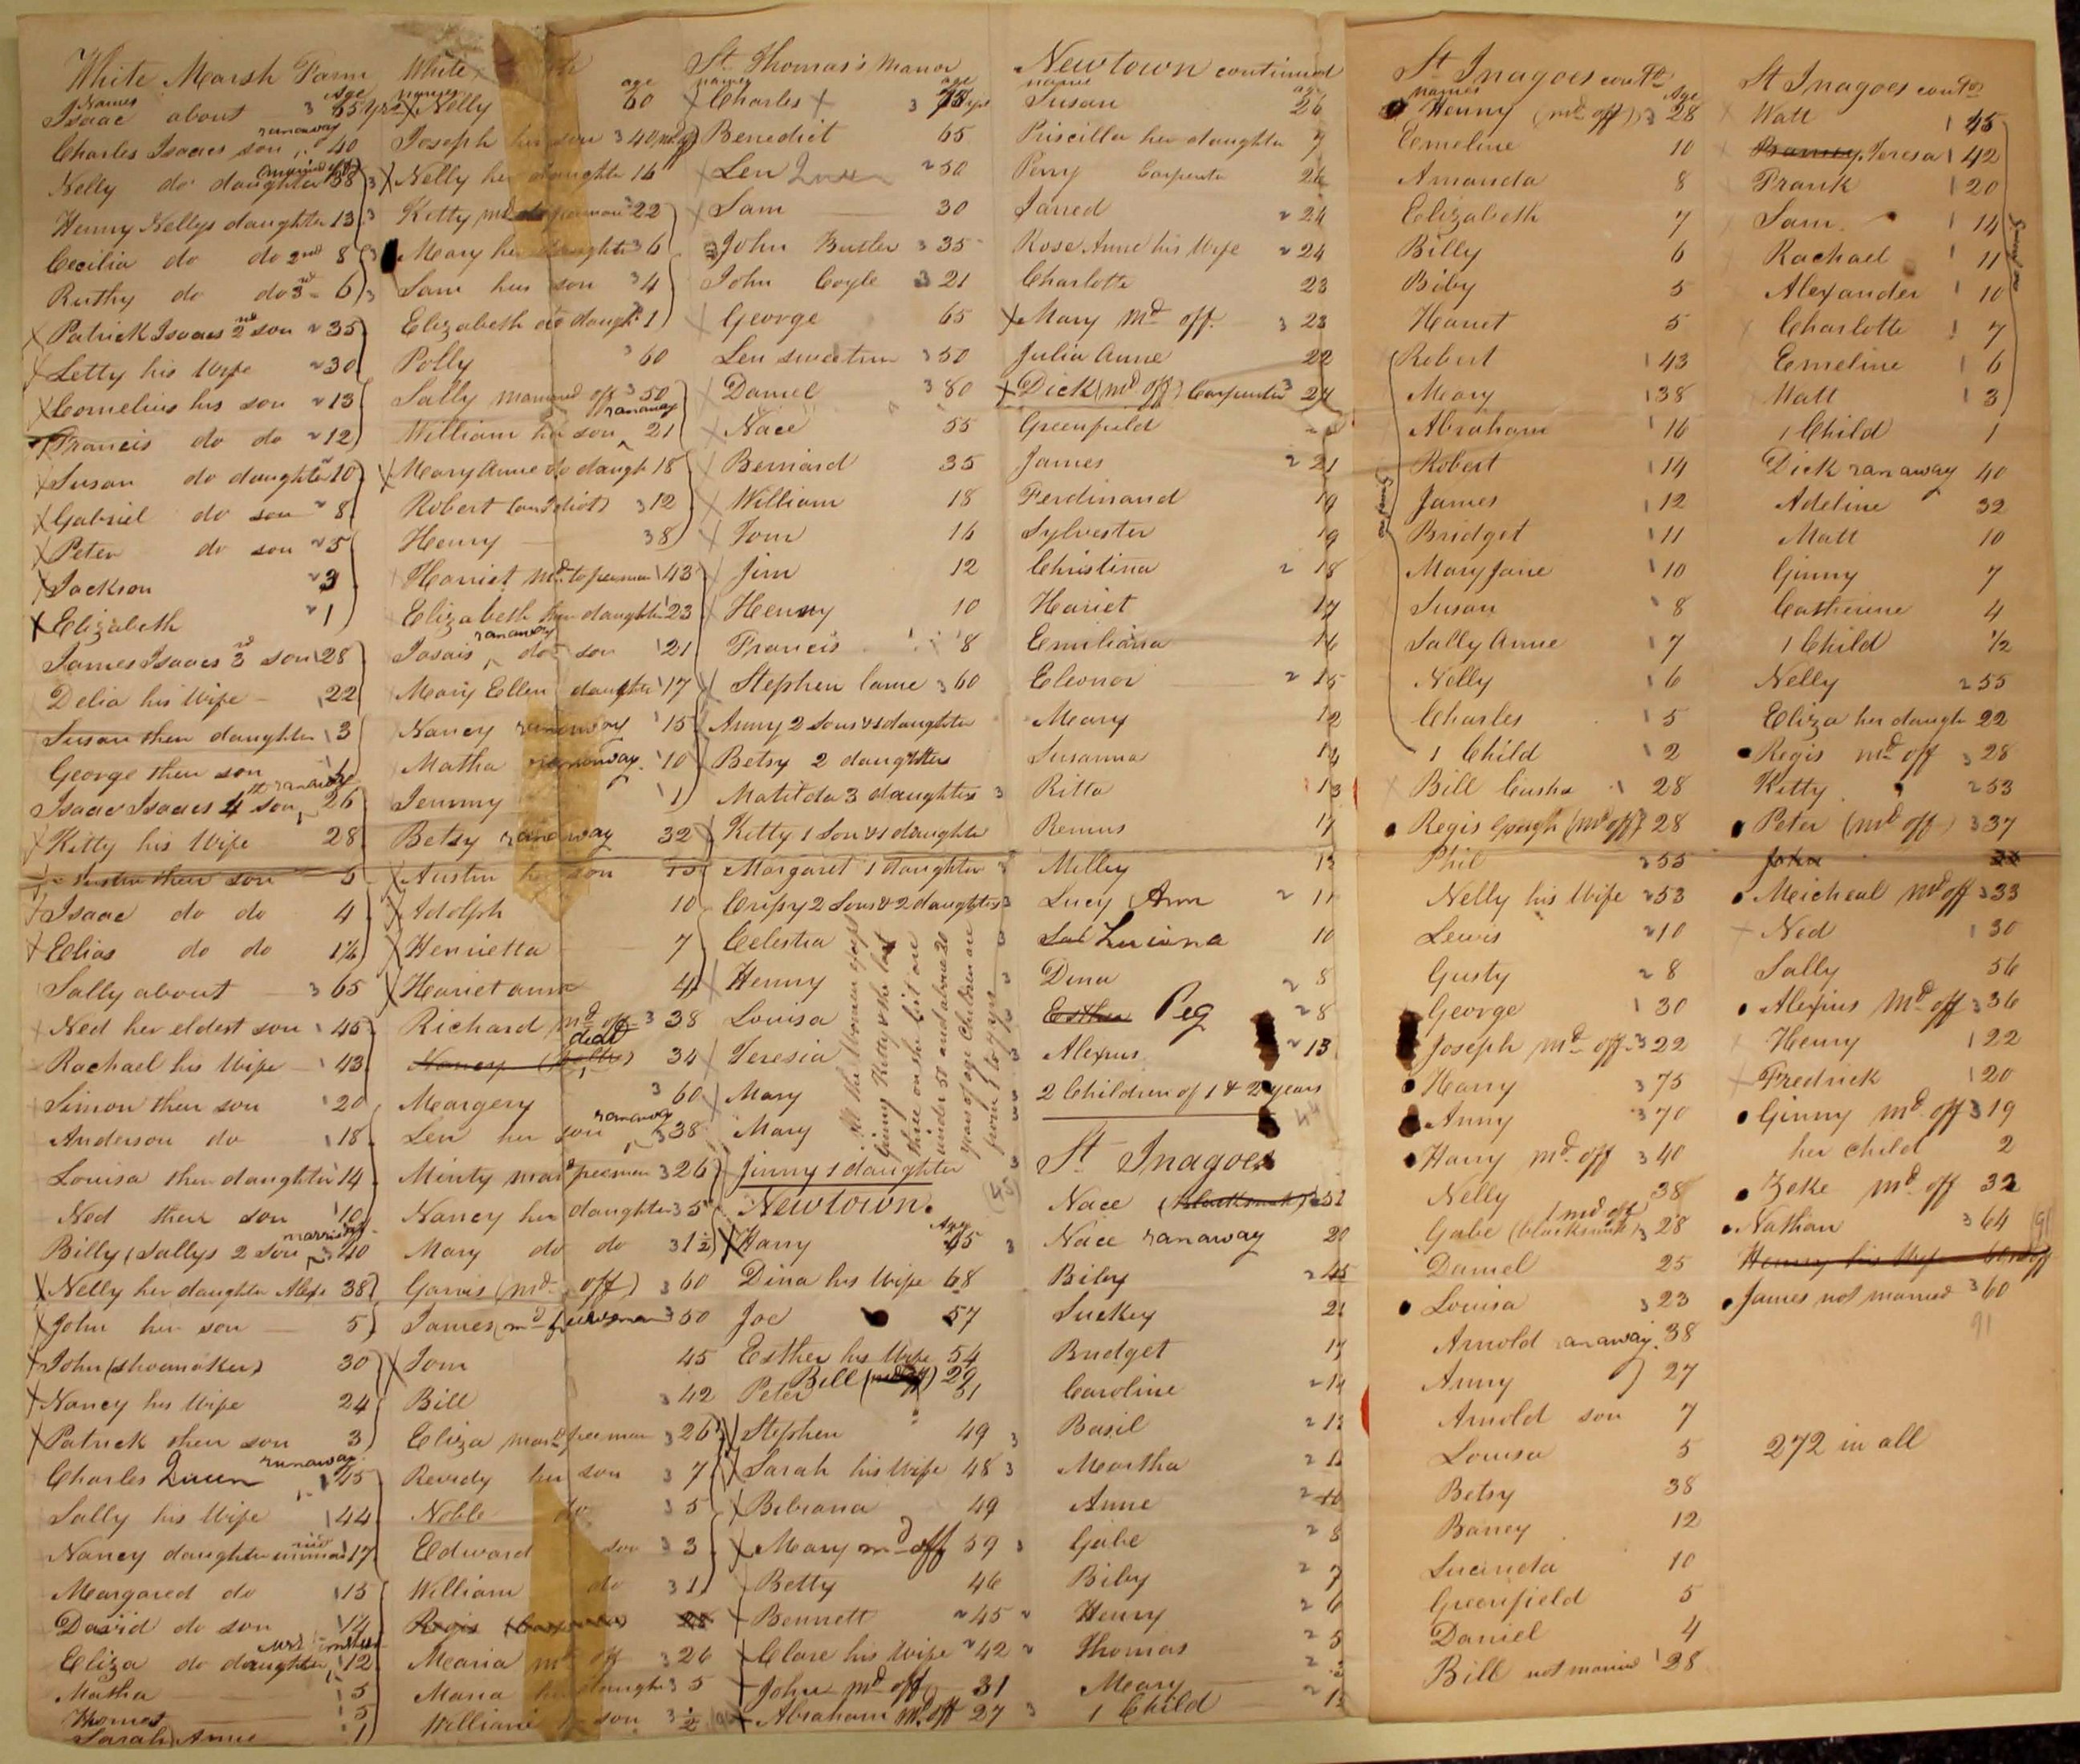 PHOTO: This is the original list of slaves from the Jesuit plantations compiled in preparation for sale in 1838.